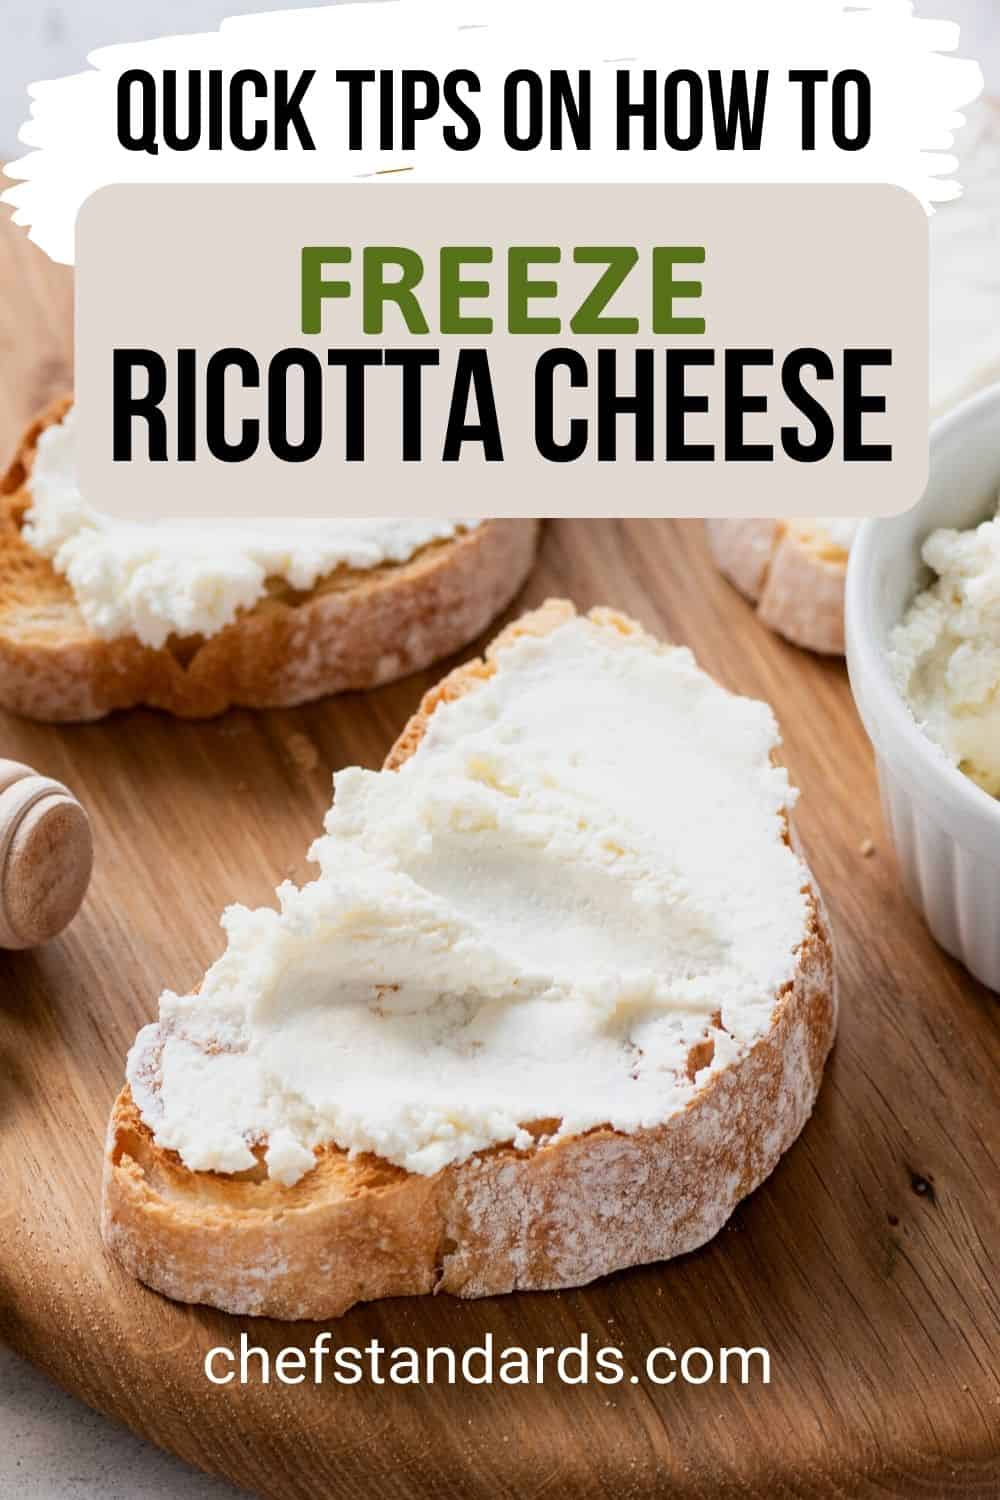 Can You Freeze Ricotta Cheese (Answered + Explanation)
